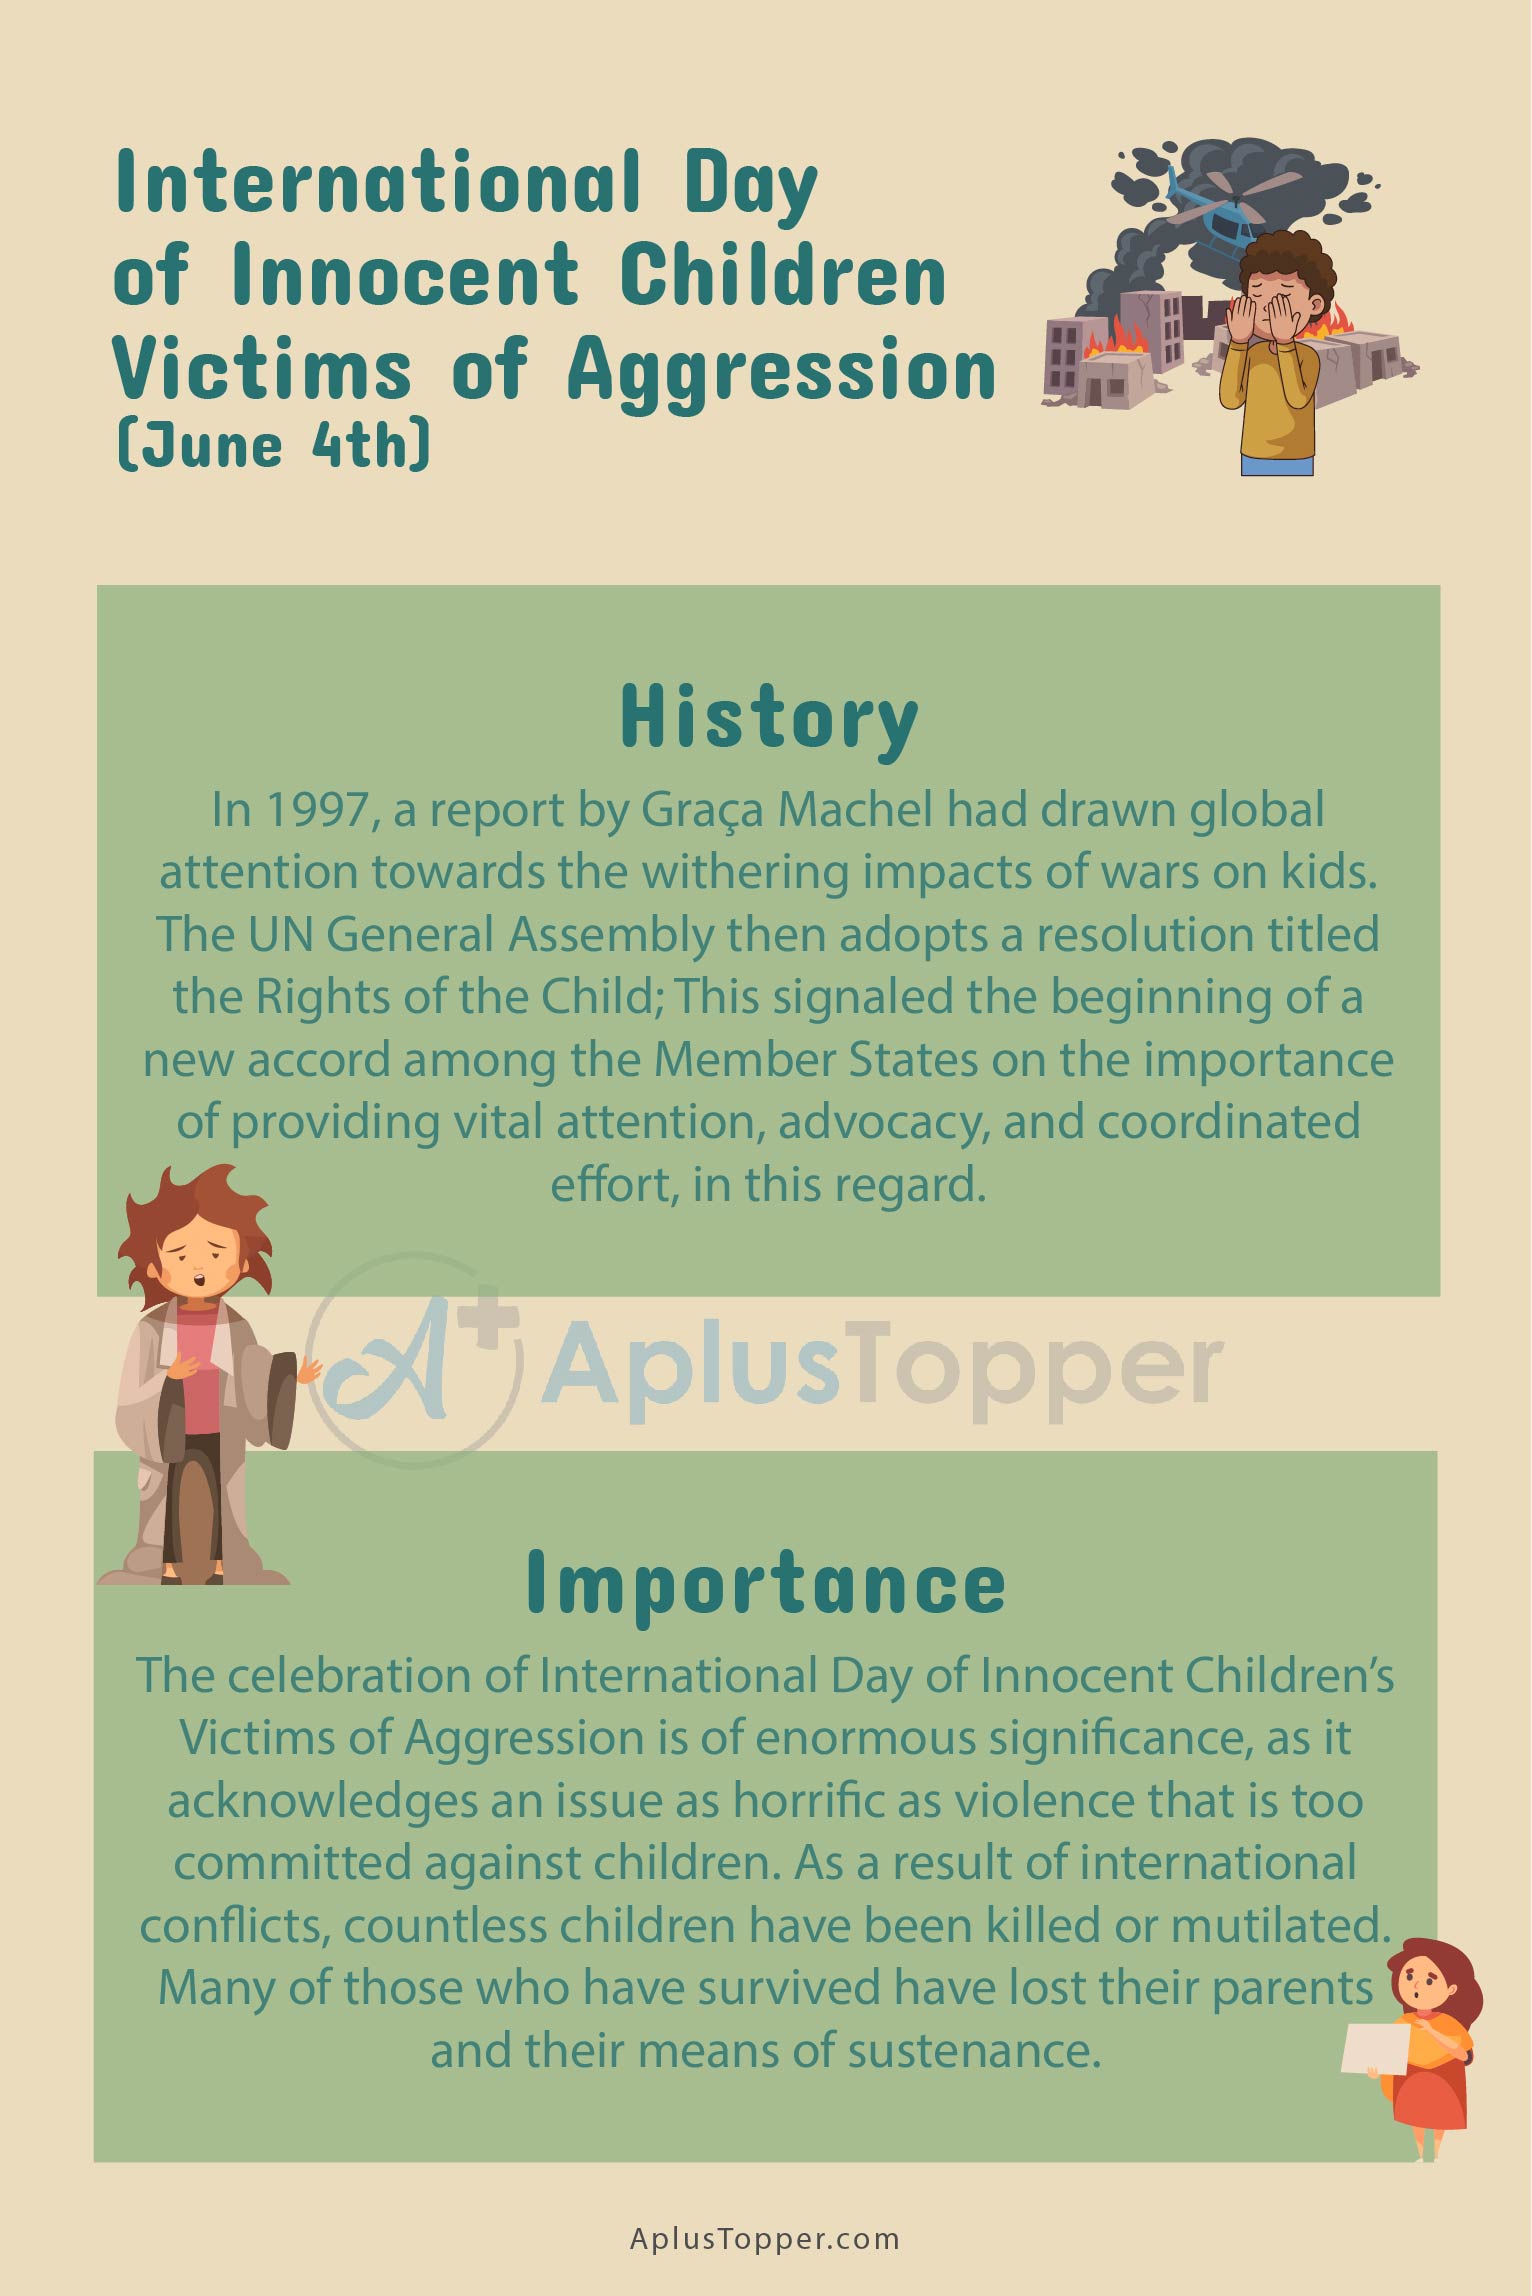 International Day of Innocent Children Victims of Aggression 2